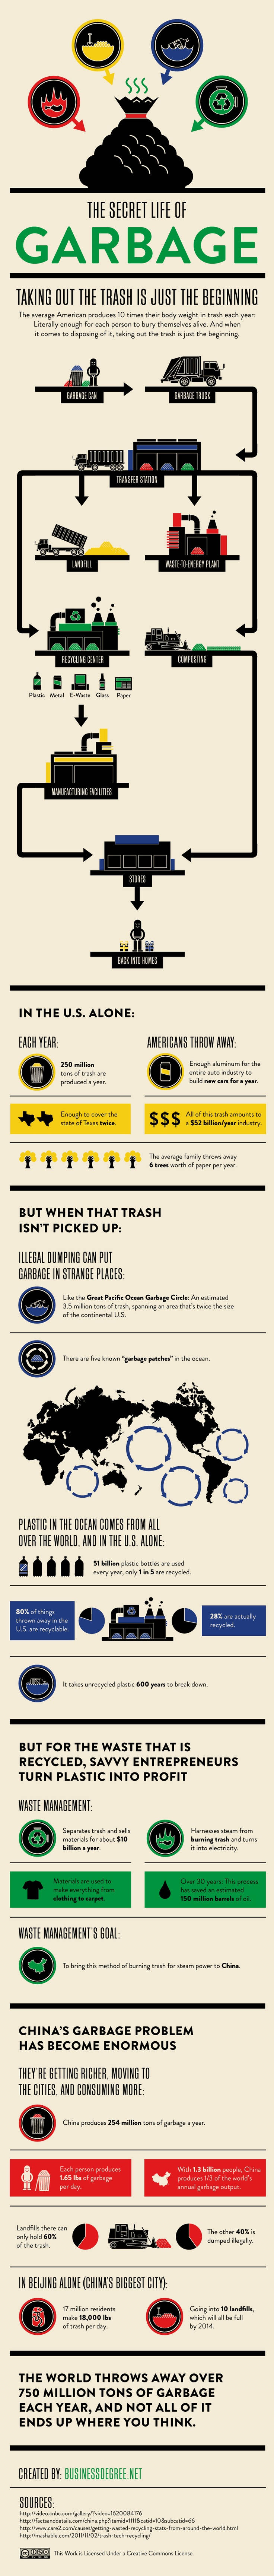 What You Need to Know About Garbage